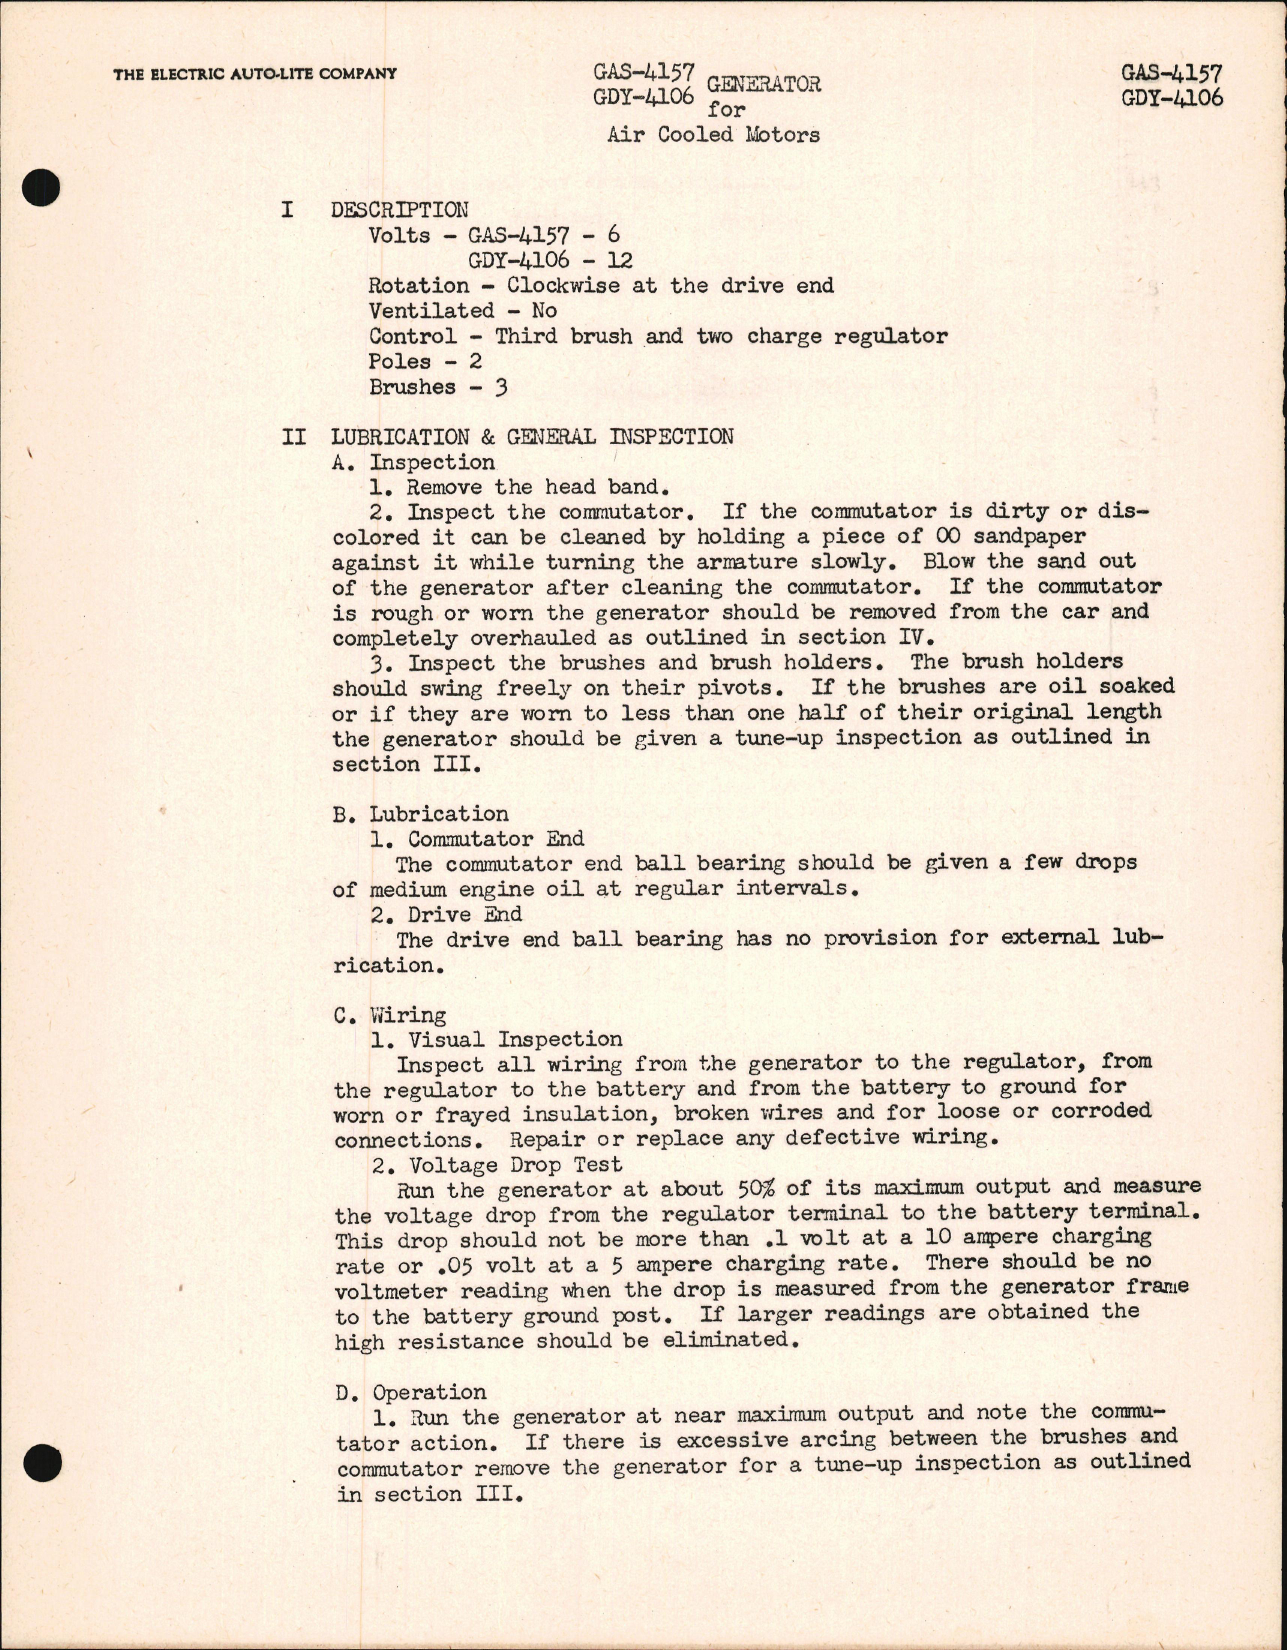 Sample page 1 from AirCorps Library document: Generators for Air Cooled Motors, Part No. GAS-4157 and GDY-4106